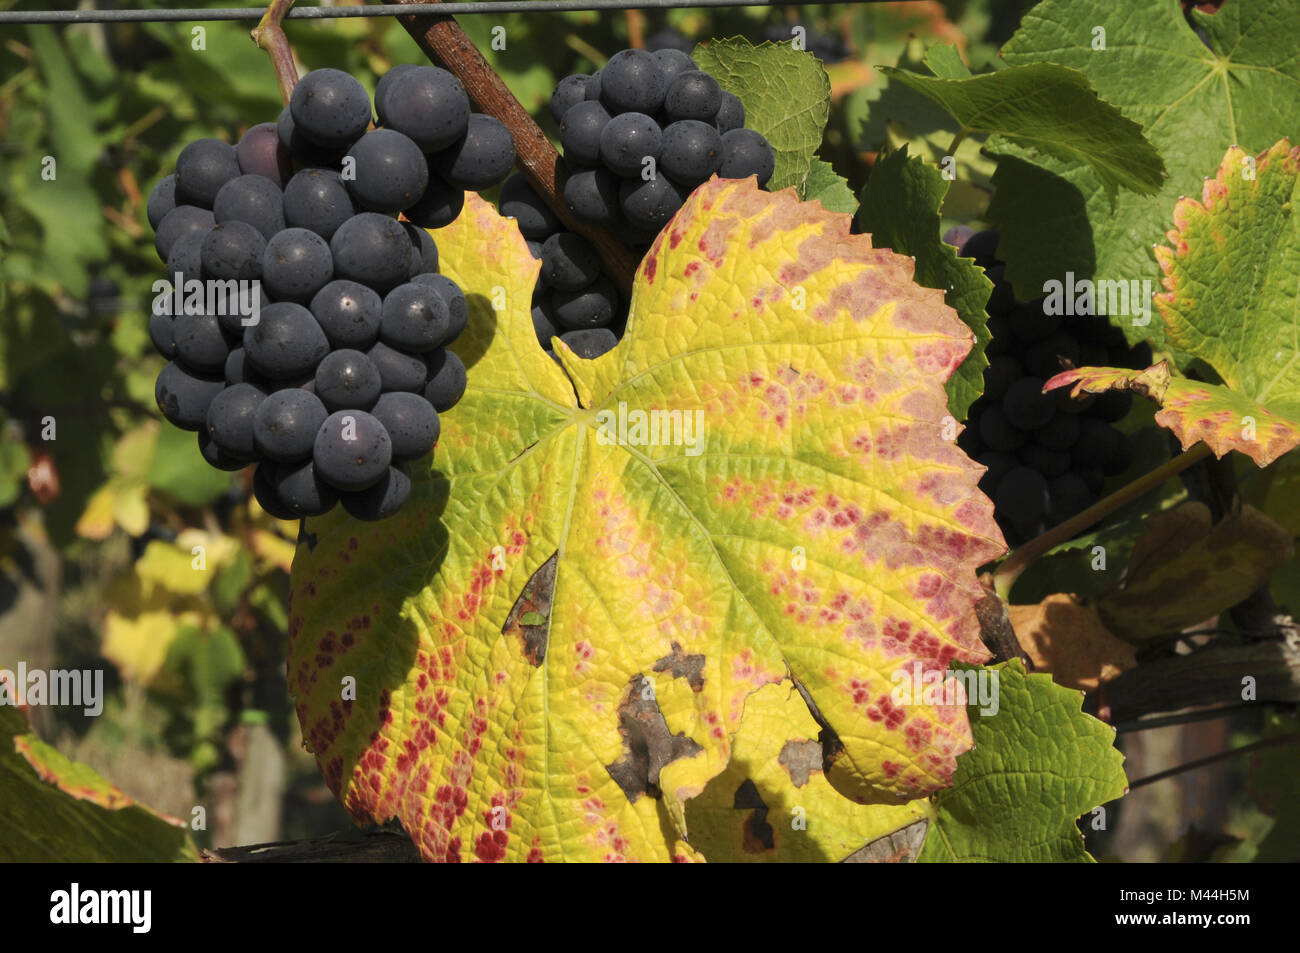 Grapes with wine leaf Stock Photo